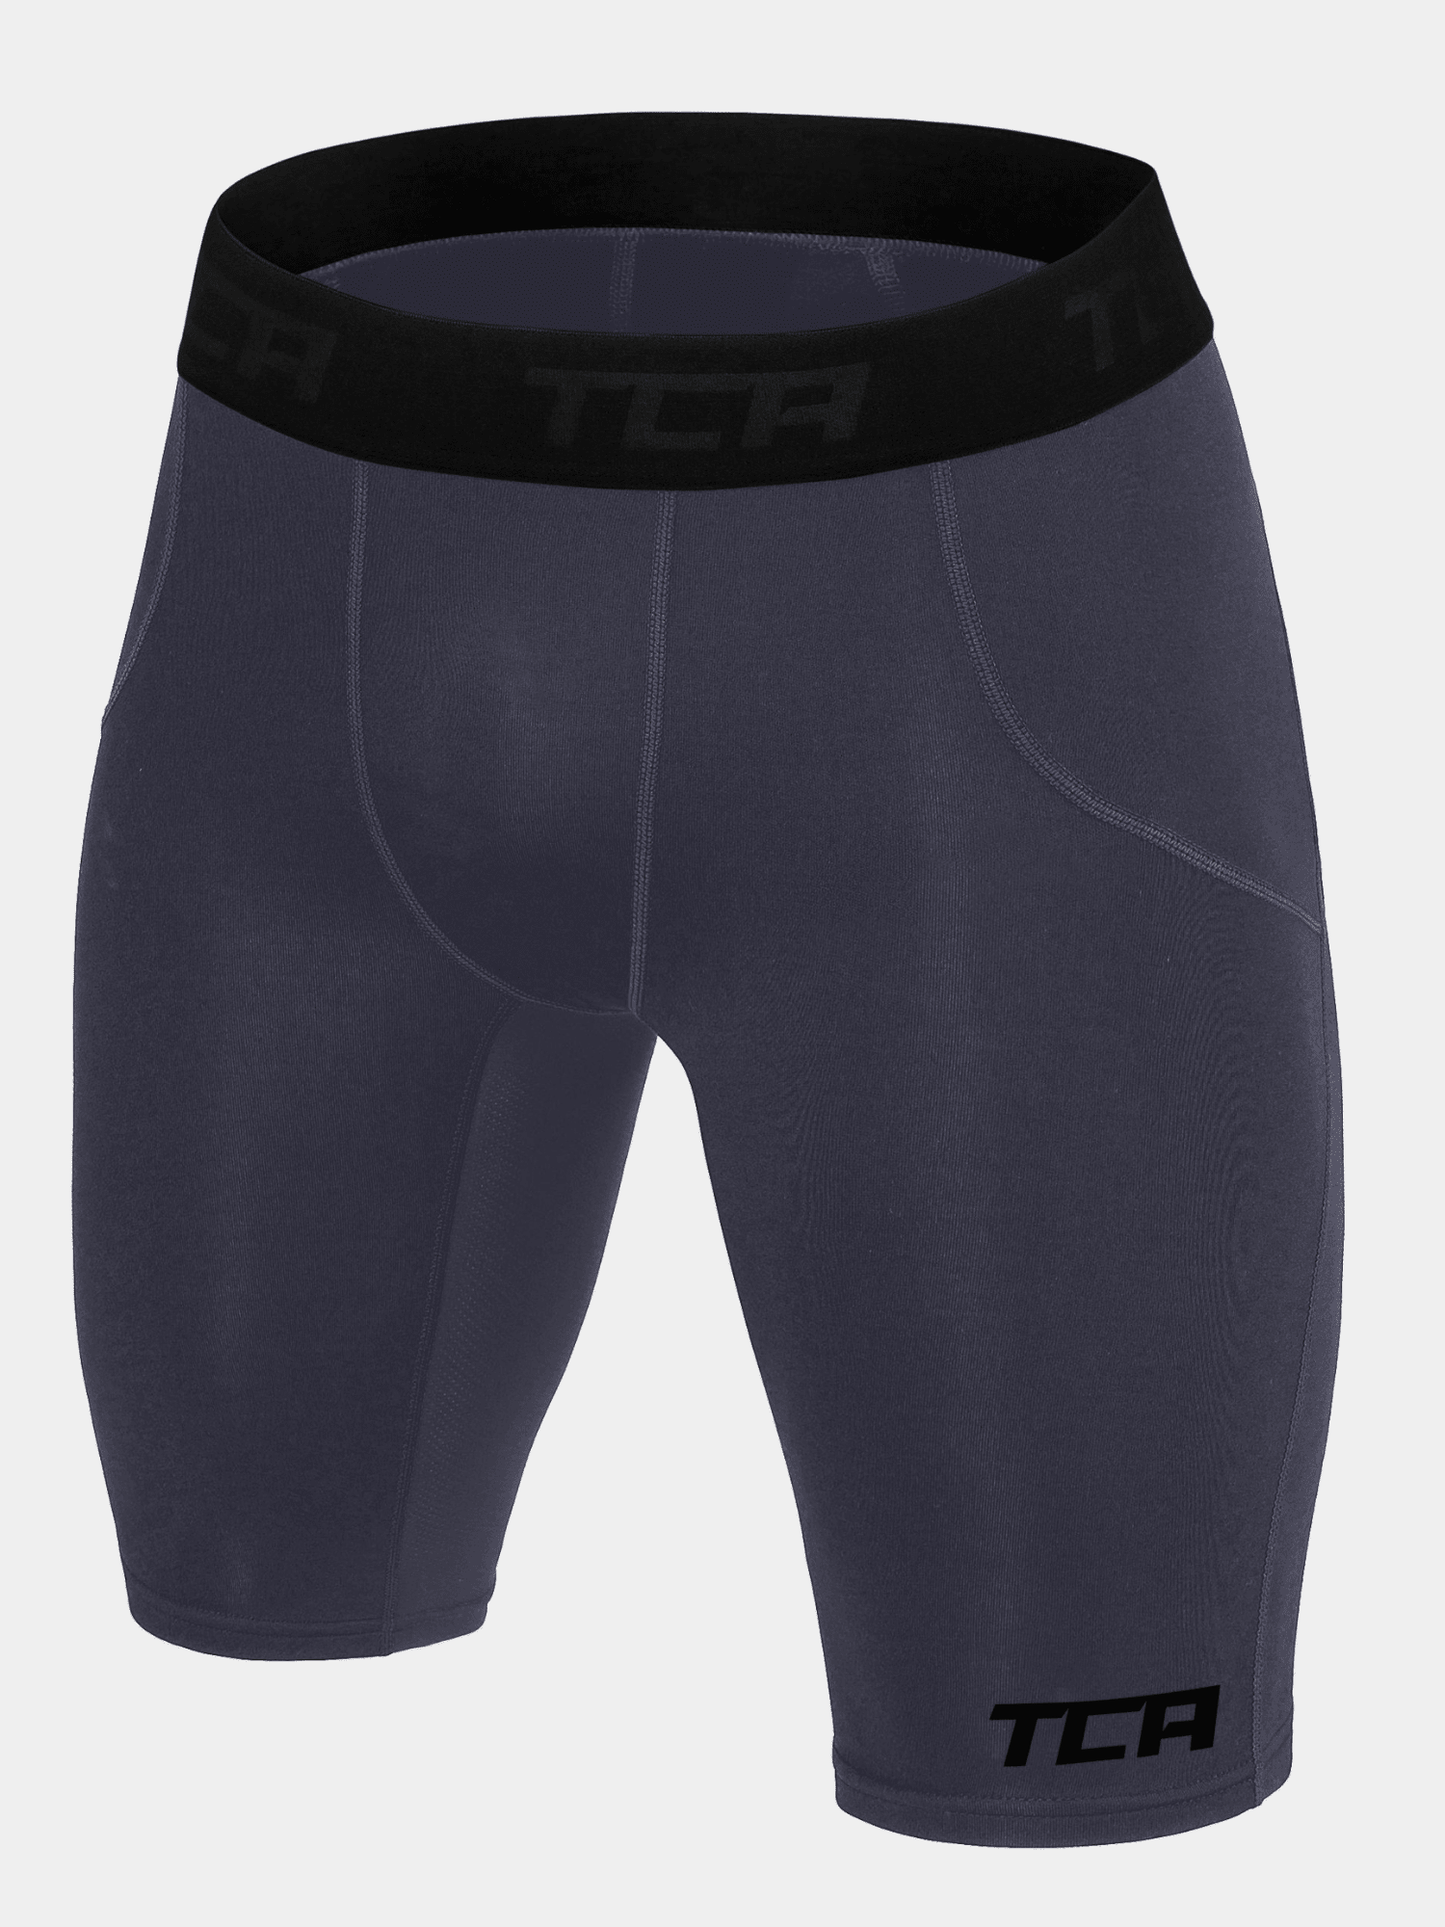 SuperThermal Compression Base Layer Shorts For Boys With Brushed Inner Fabric